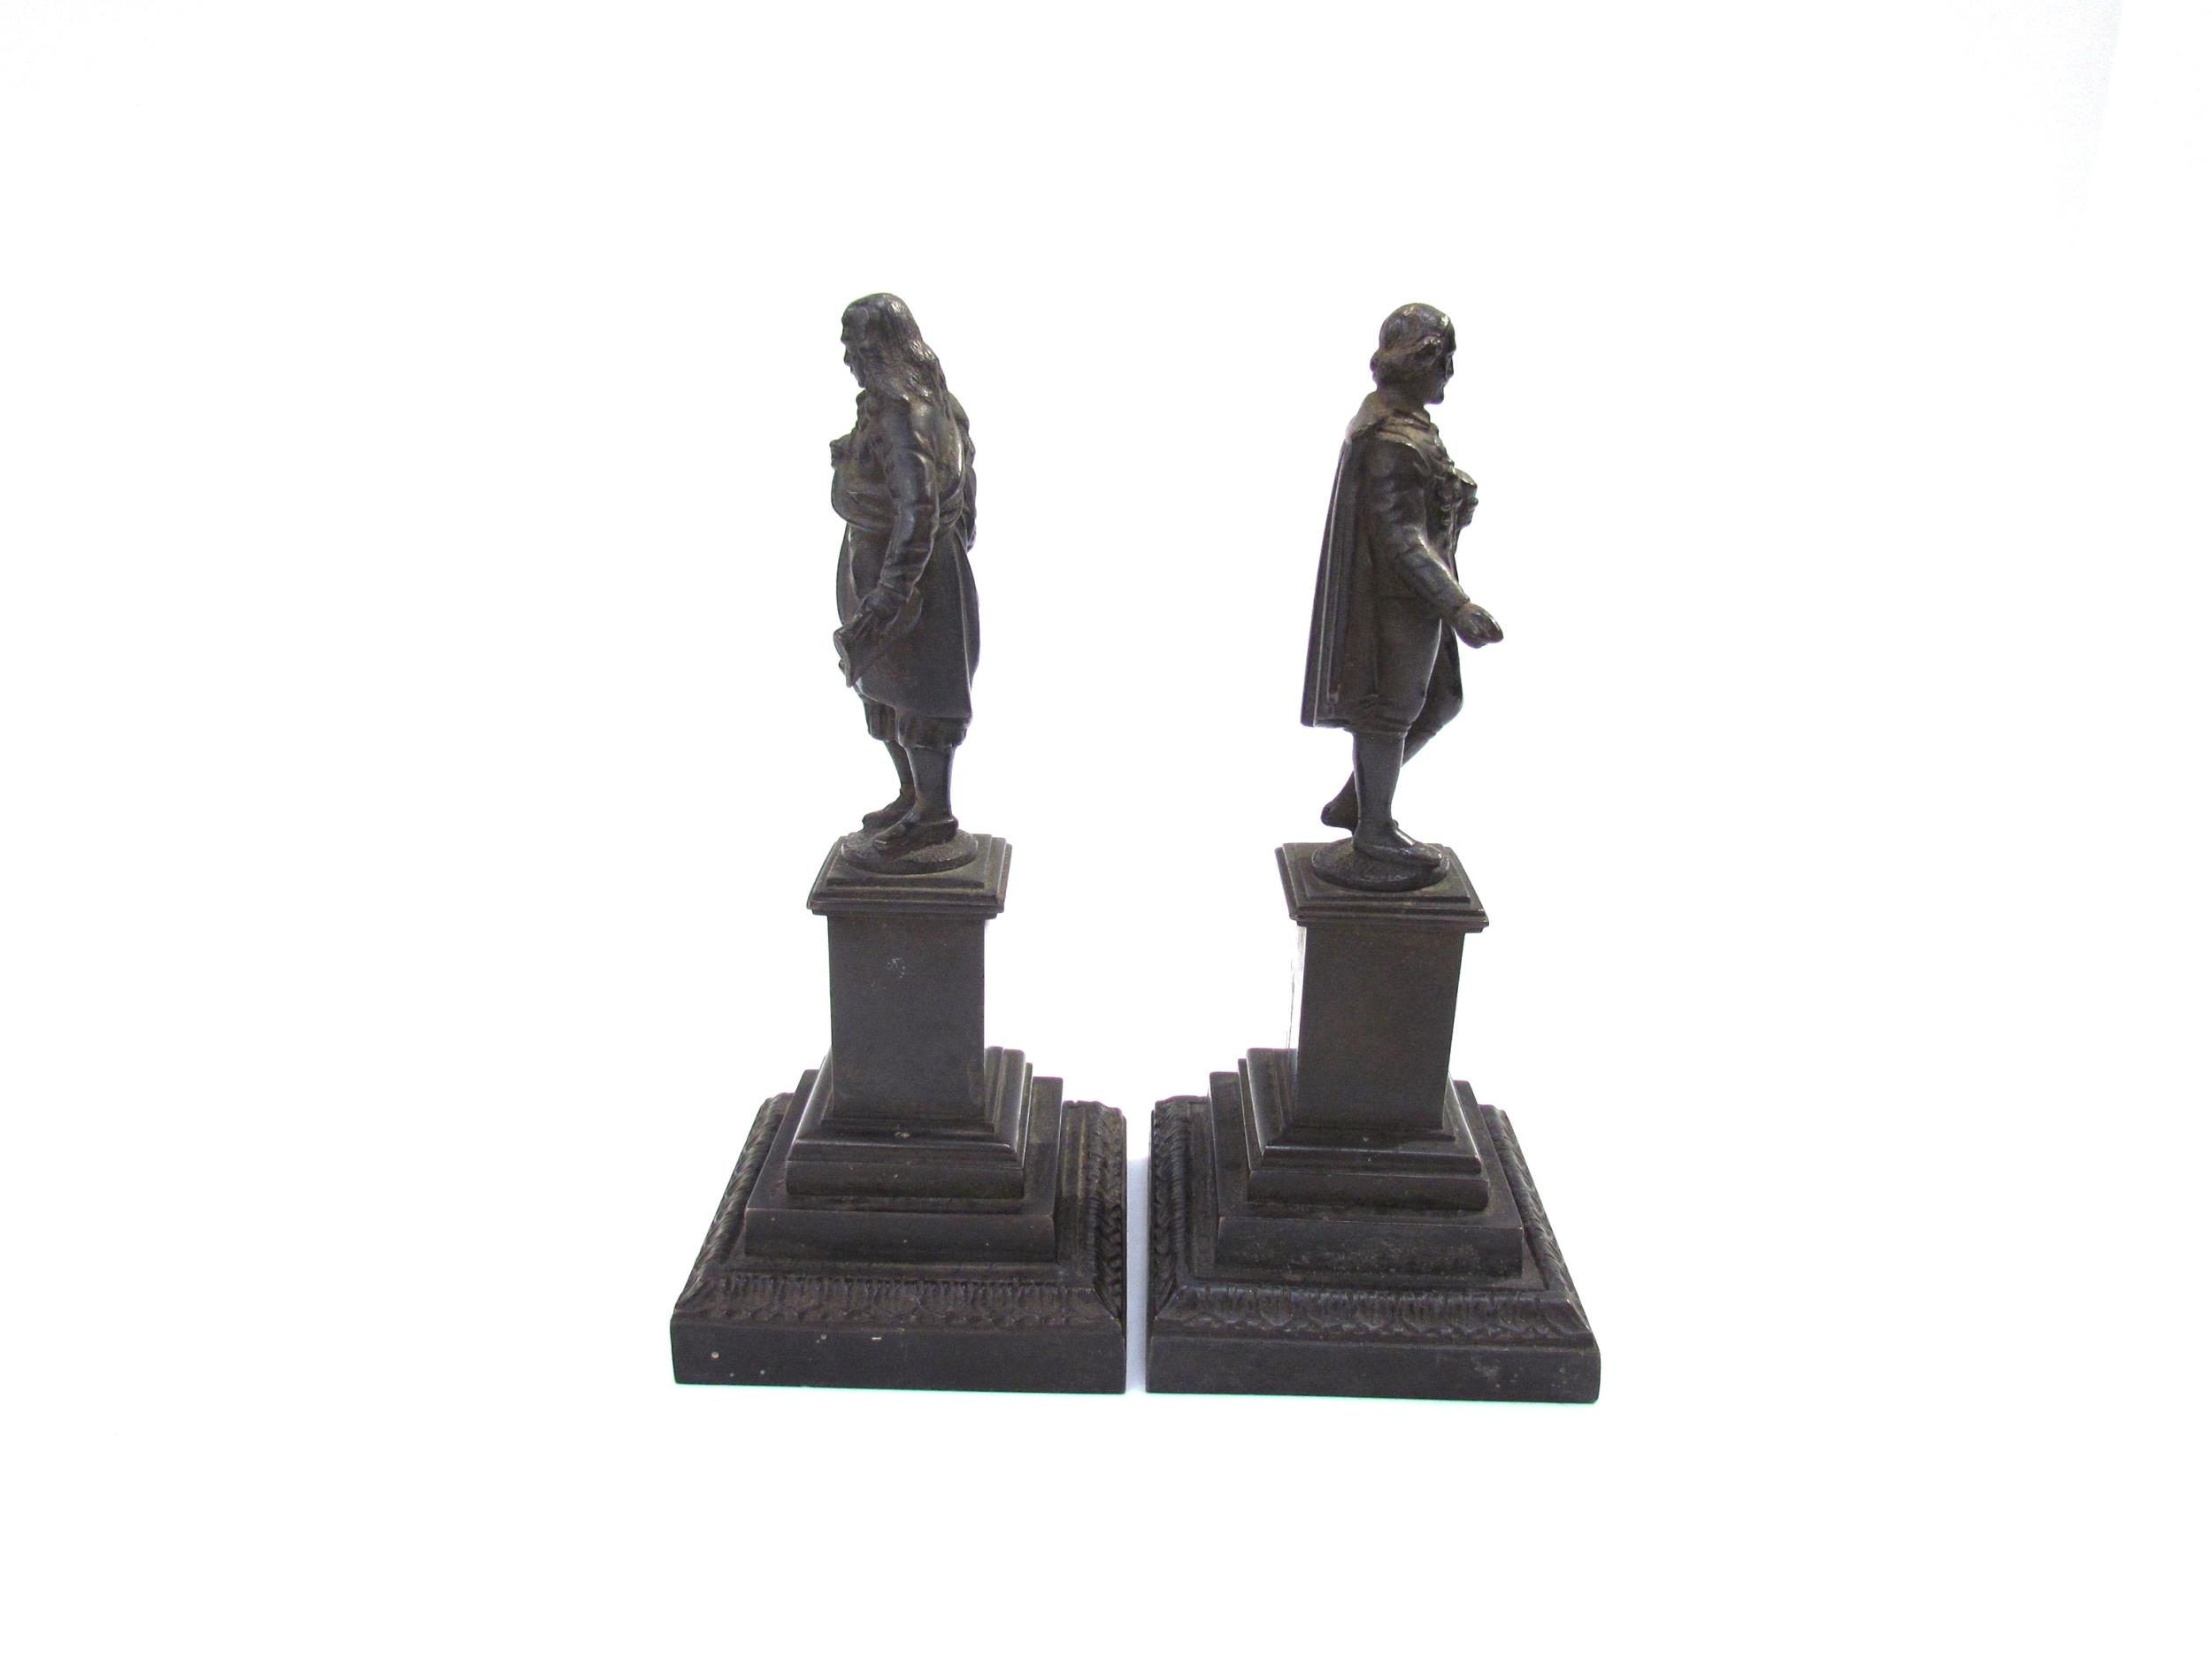 A pair of 19th Century bronze sculptures of philosophers, each 17.5cm tall including plinth base - Image 6 of 6